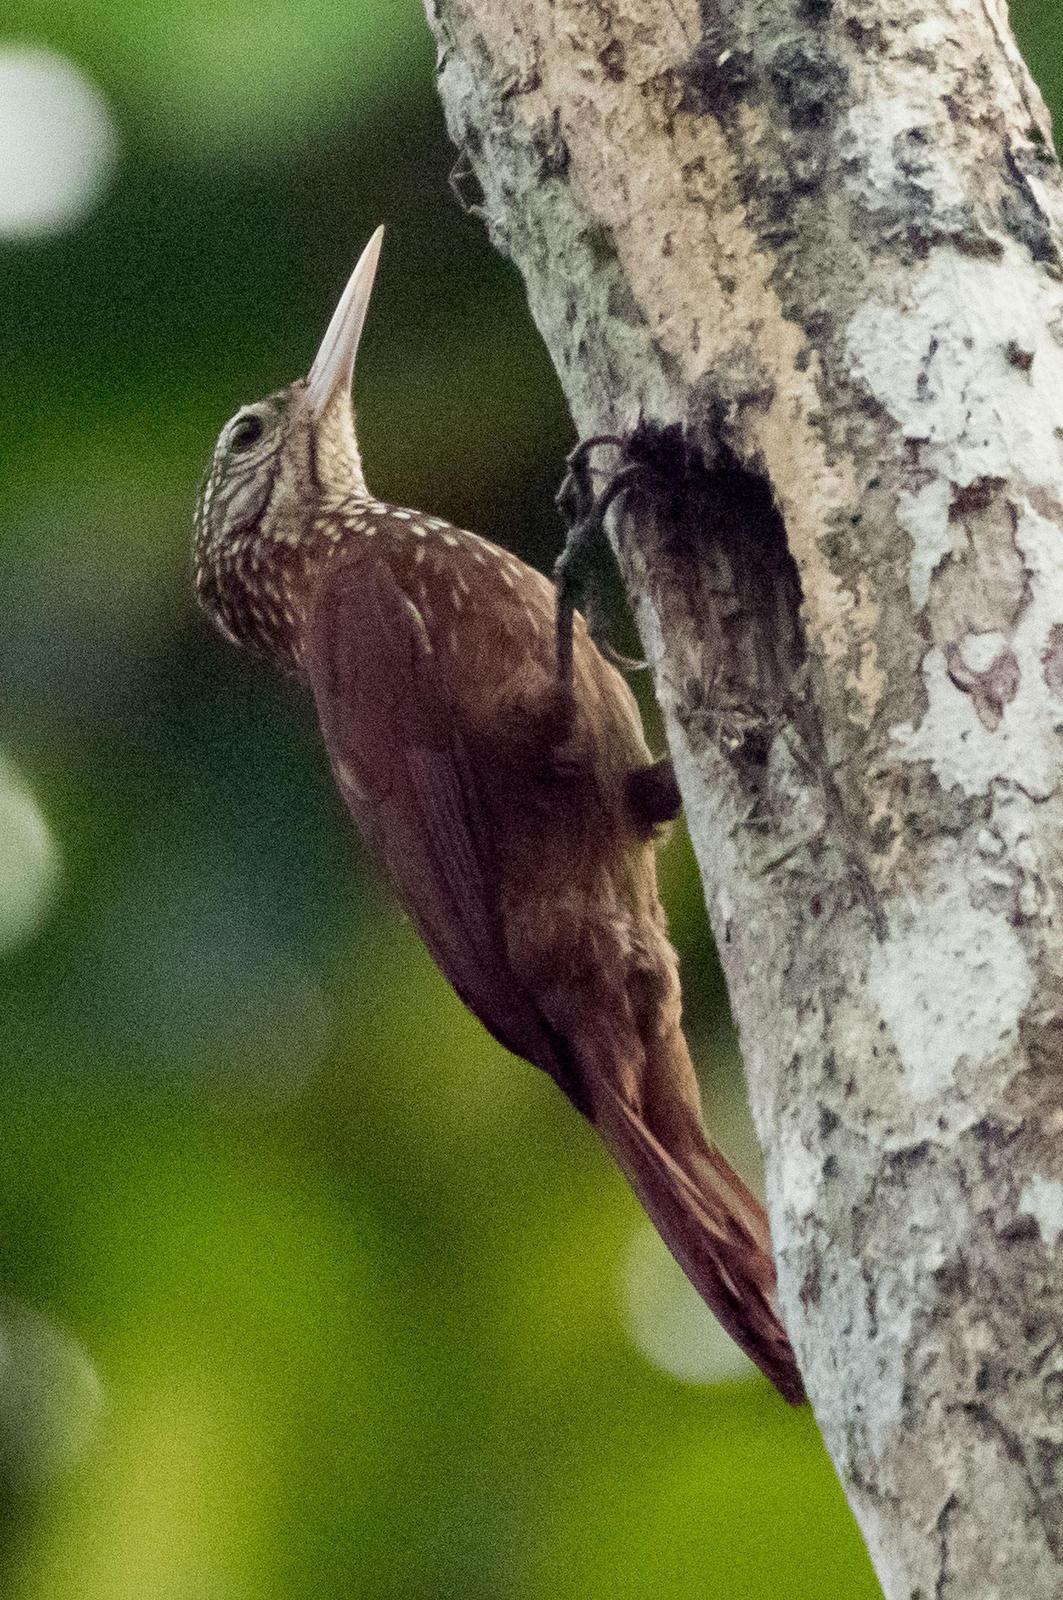 Straight-billed Woodcreeper Photo by Phil Kahler